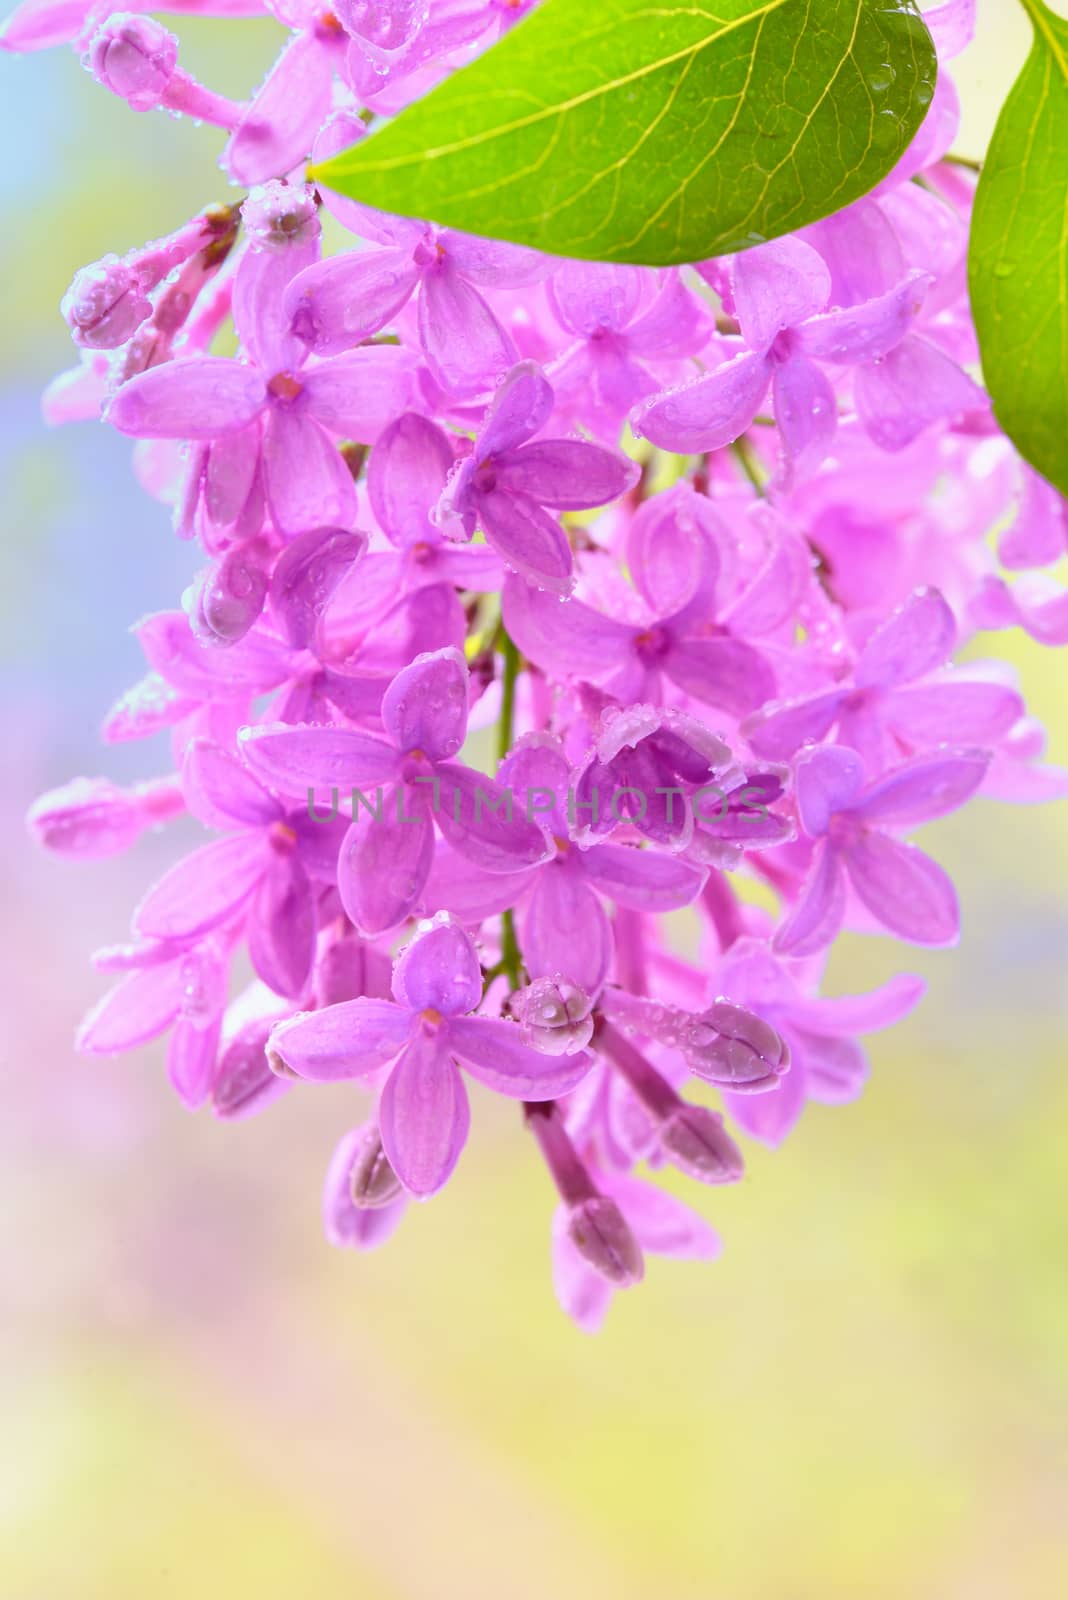 Spring lilac violet flowers by mady70